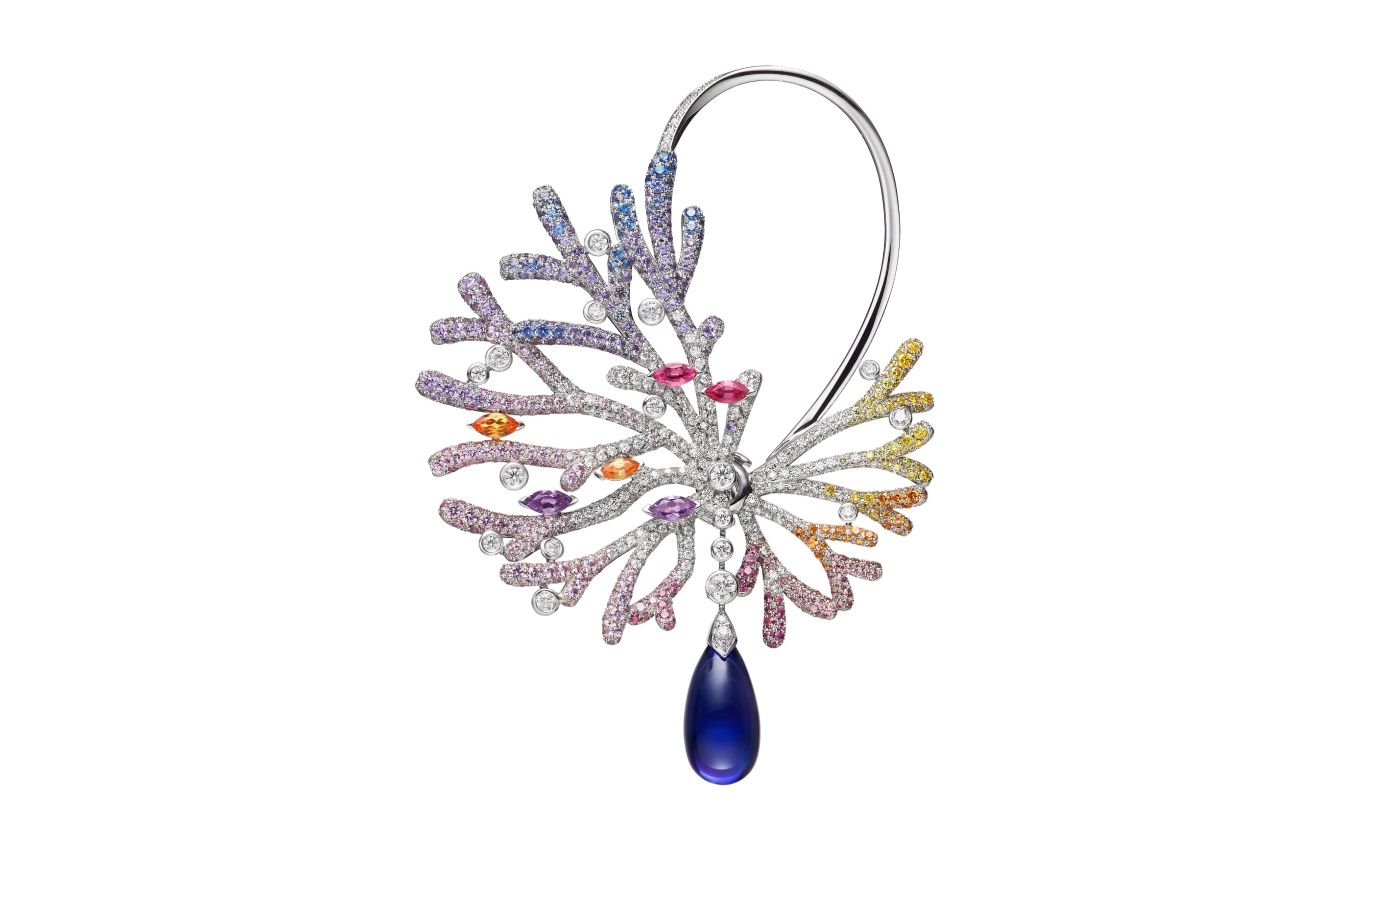 Mikimoto Sea Anemone high jewellery earring in white gold, tanzanite, sapphire, garnet, spinel and diamond from the Praise to the Sea collection